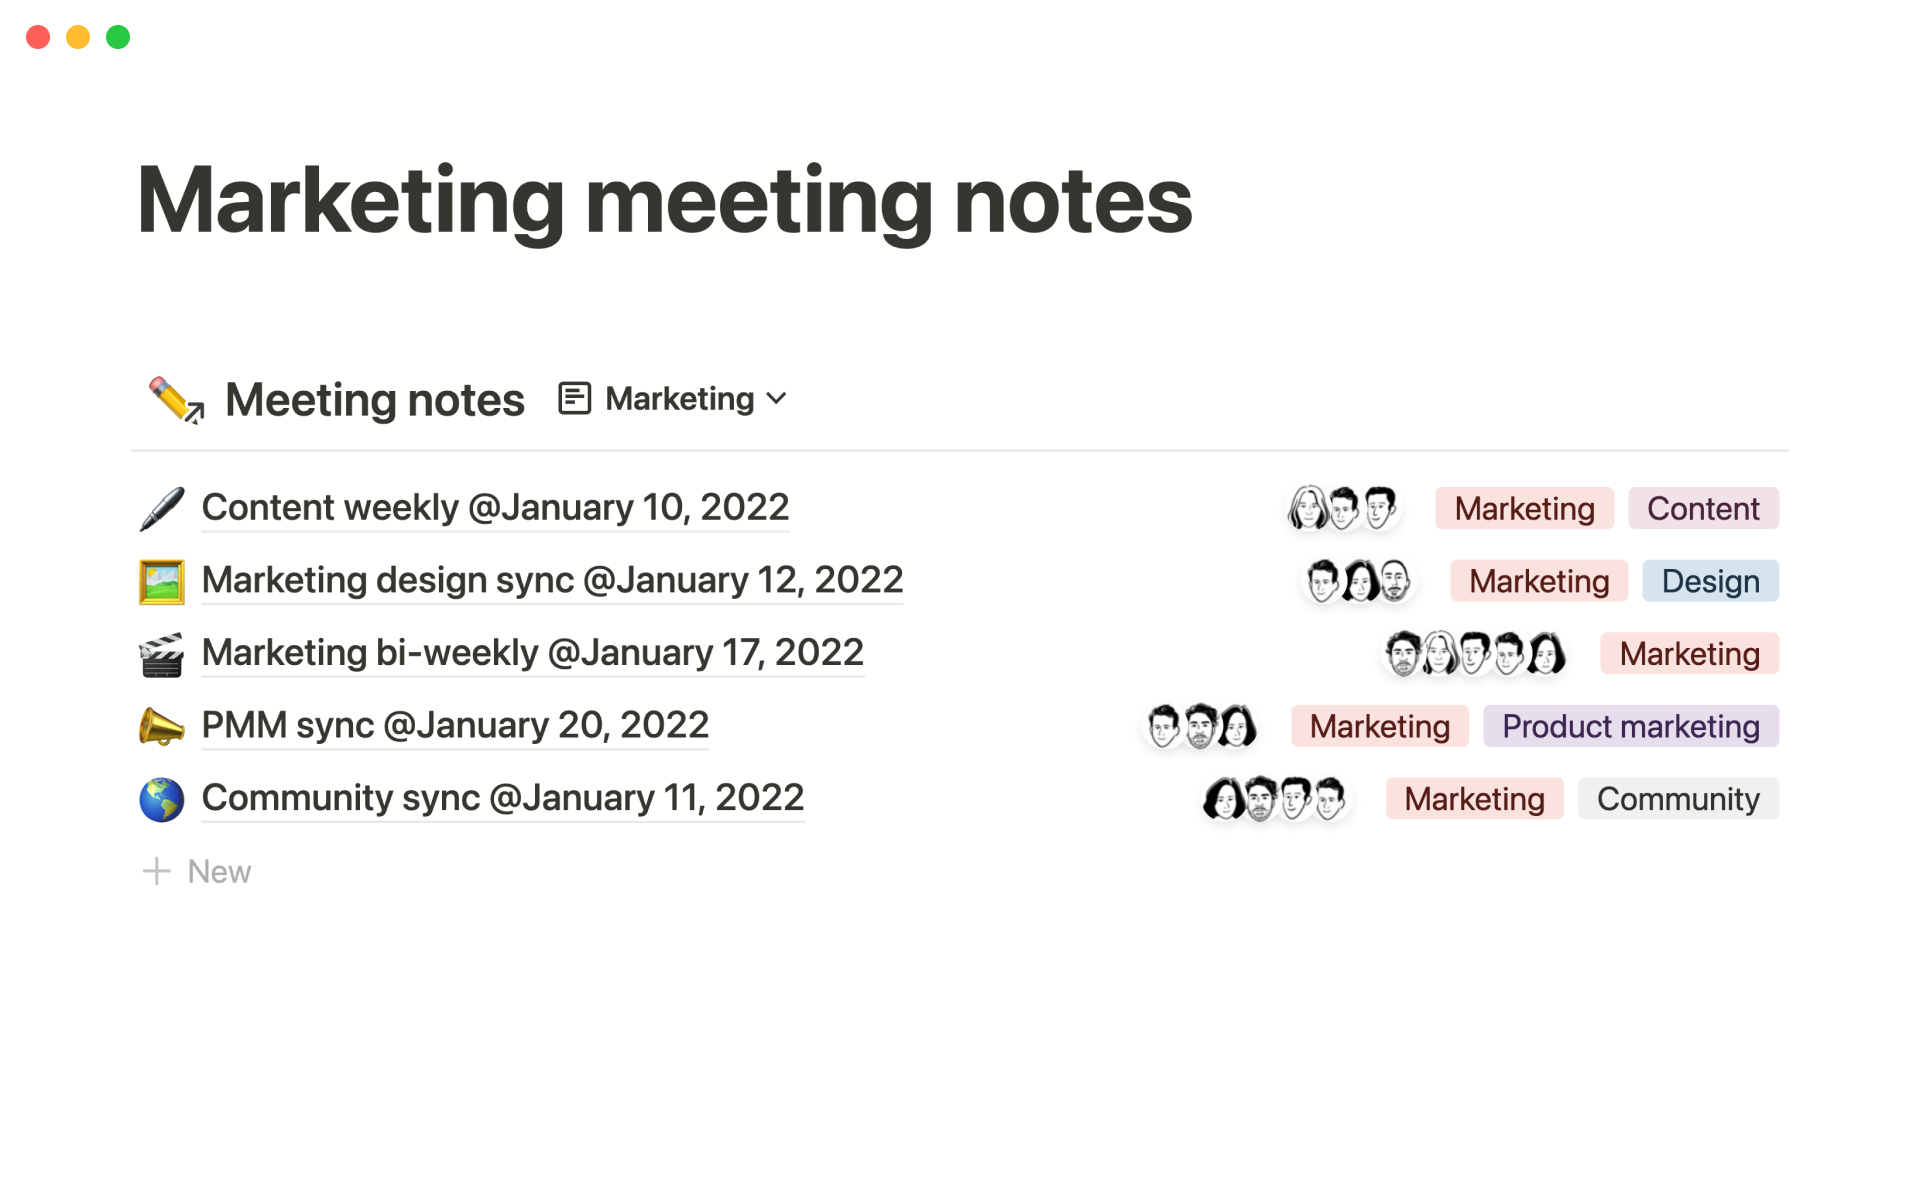 Build transparency among your teams and consolidate all your meeting notes into one single source of truth.